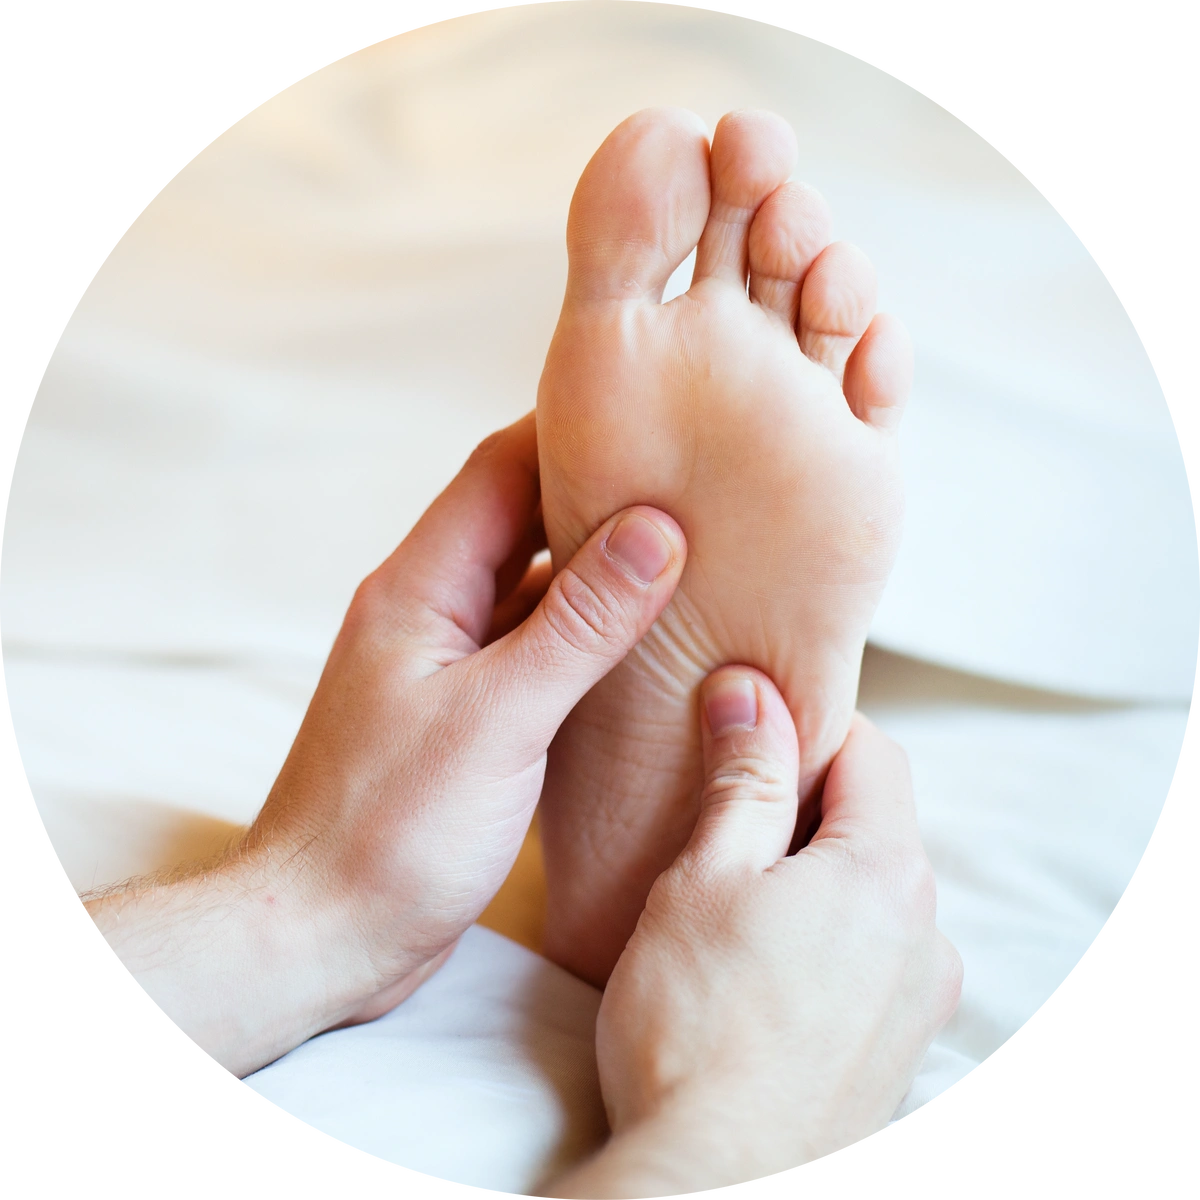 Foot Massage Benefits for Maintaining Healthy Feet